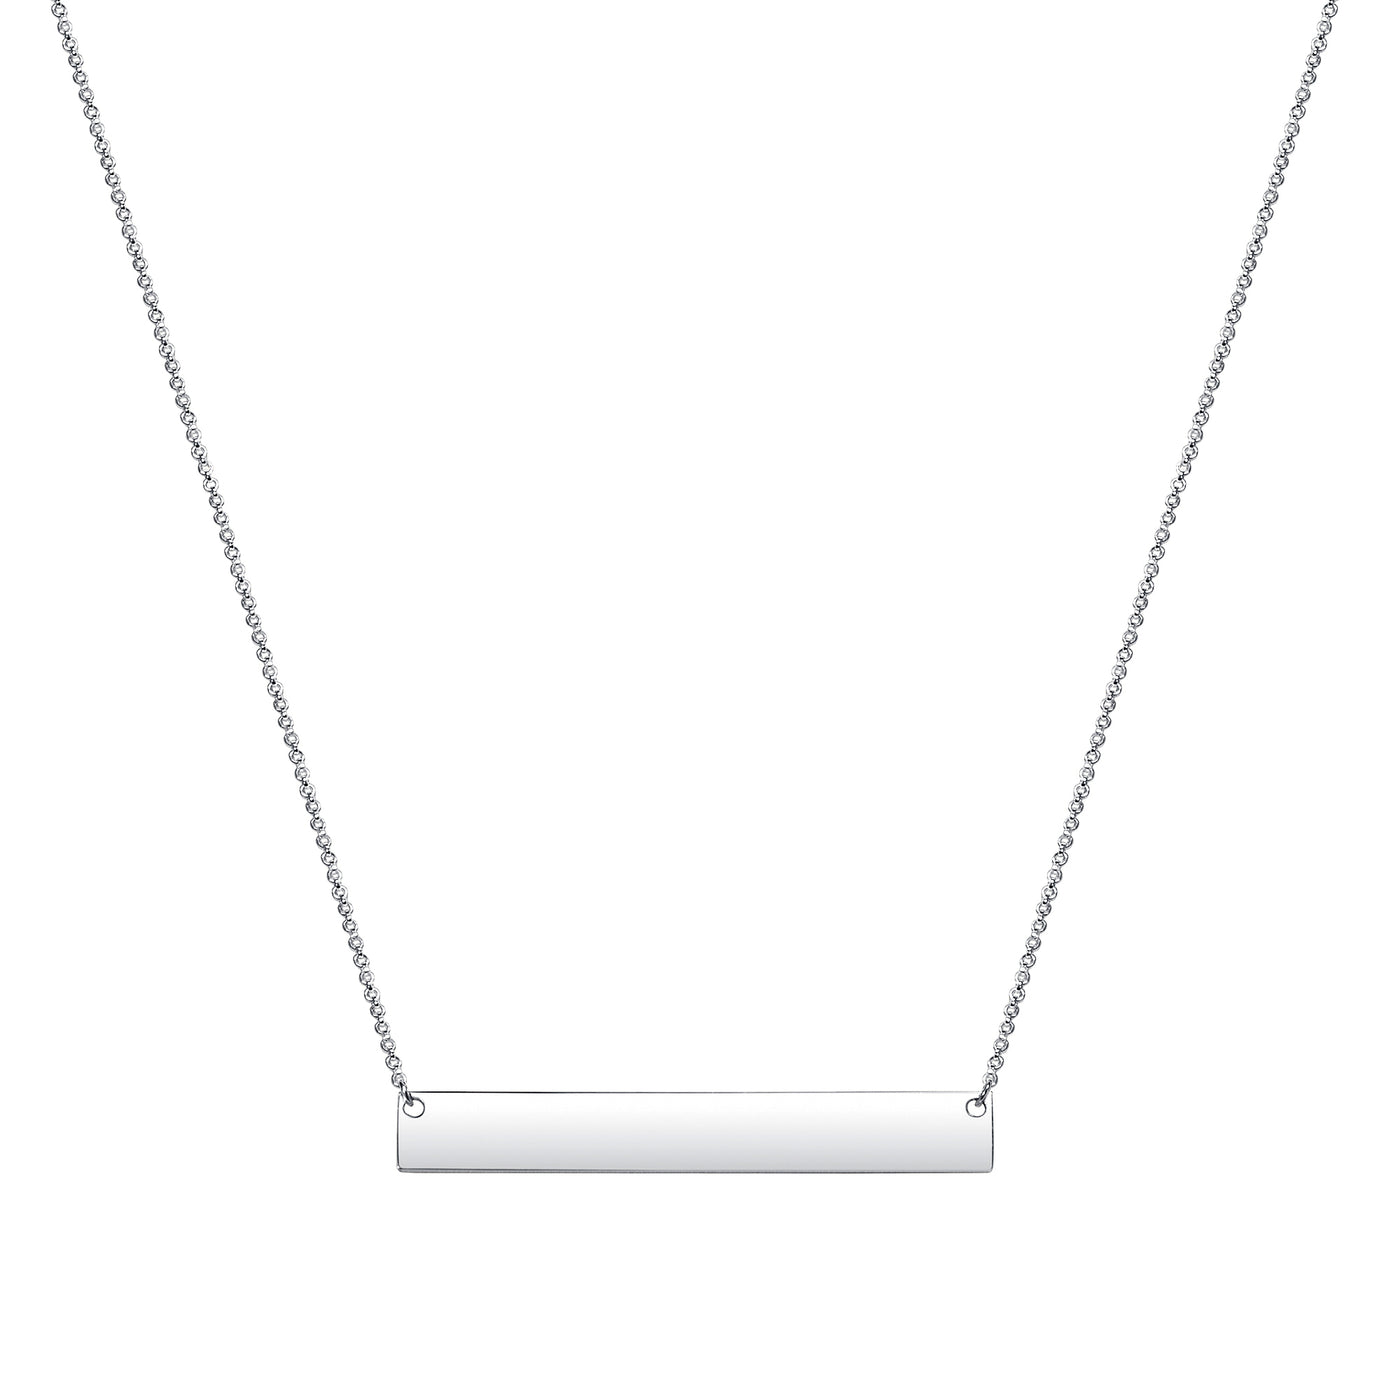 Italian Sterling Silver Engravable Polished Bar Necklace Choker